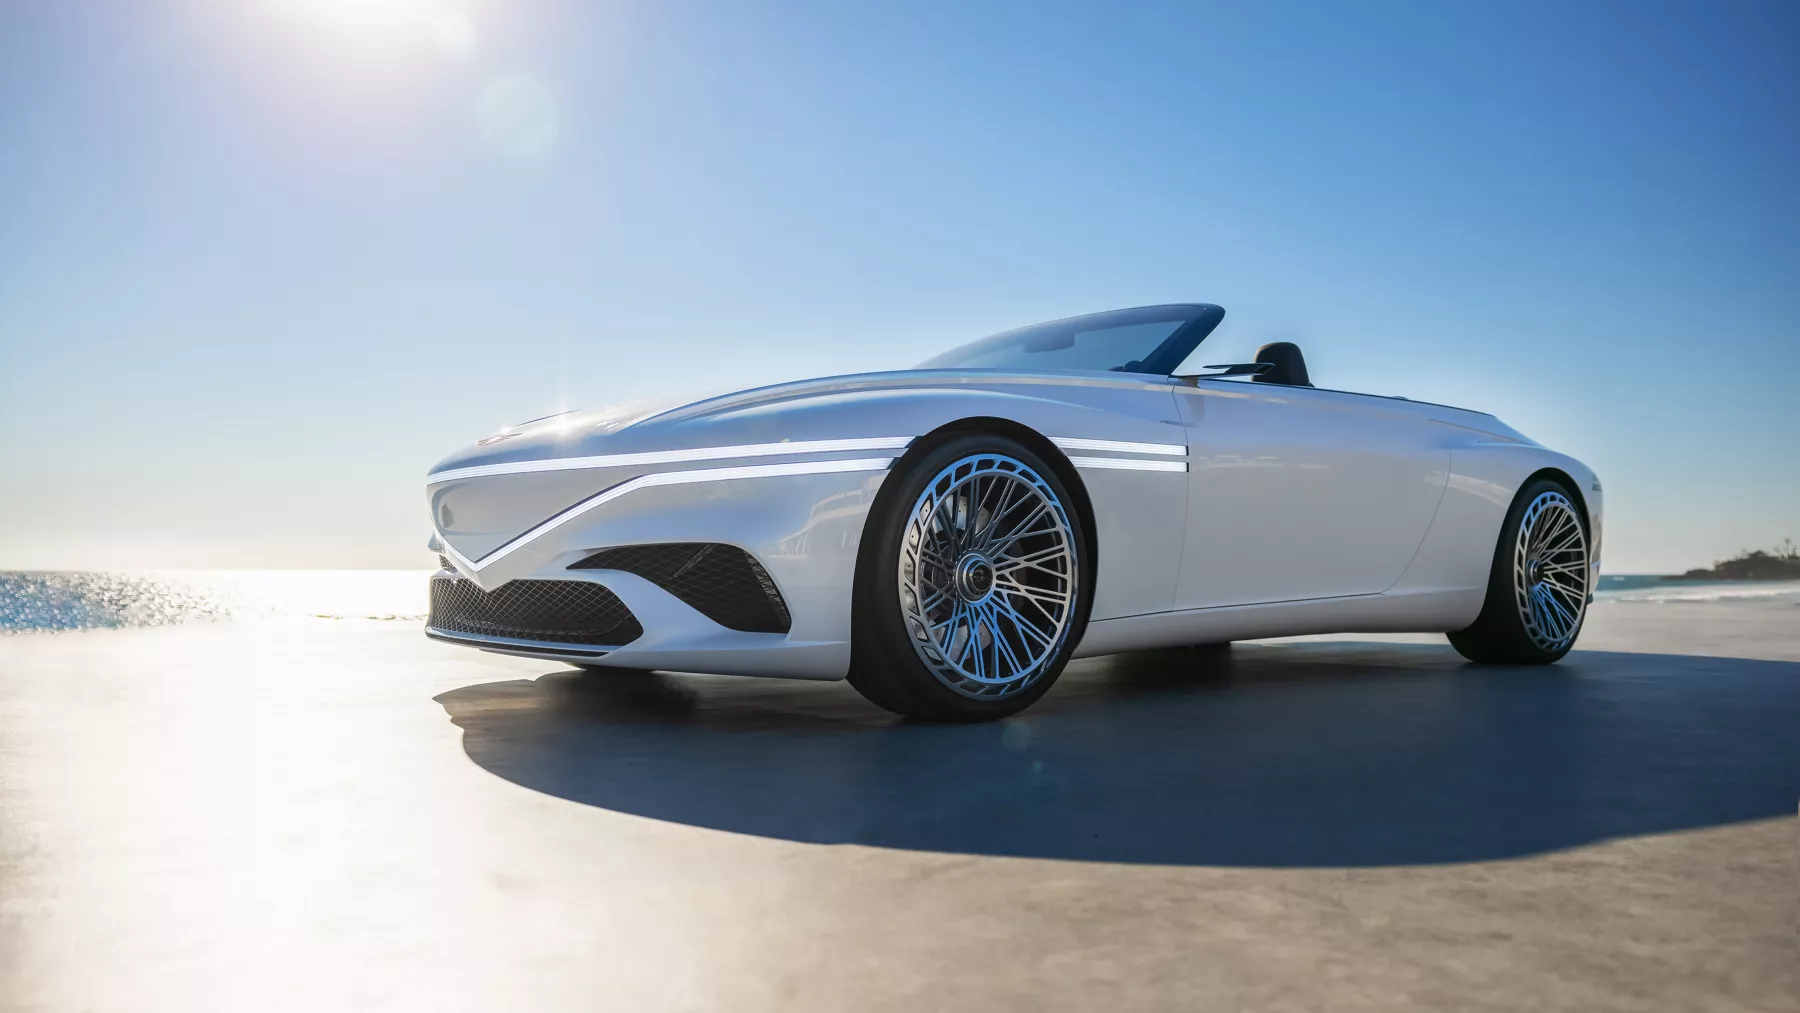 X Convertible Concept parked on a beach with an ocean and sunset in the background.